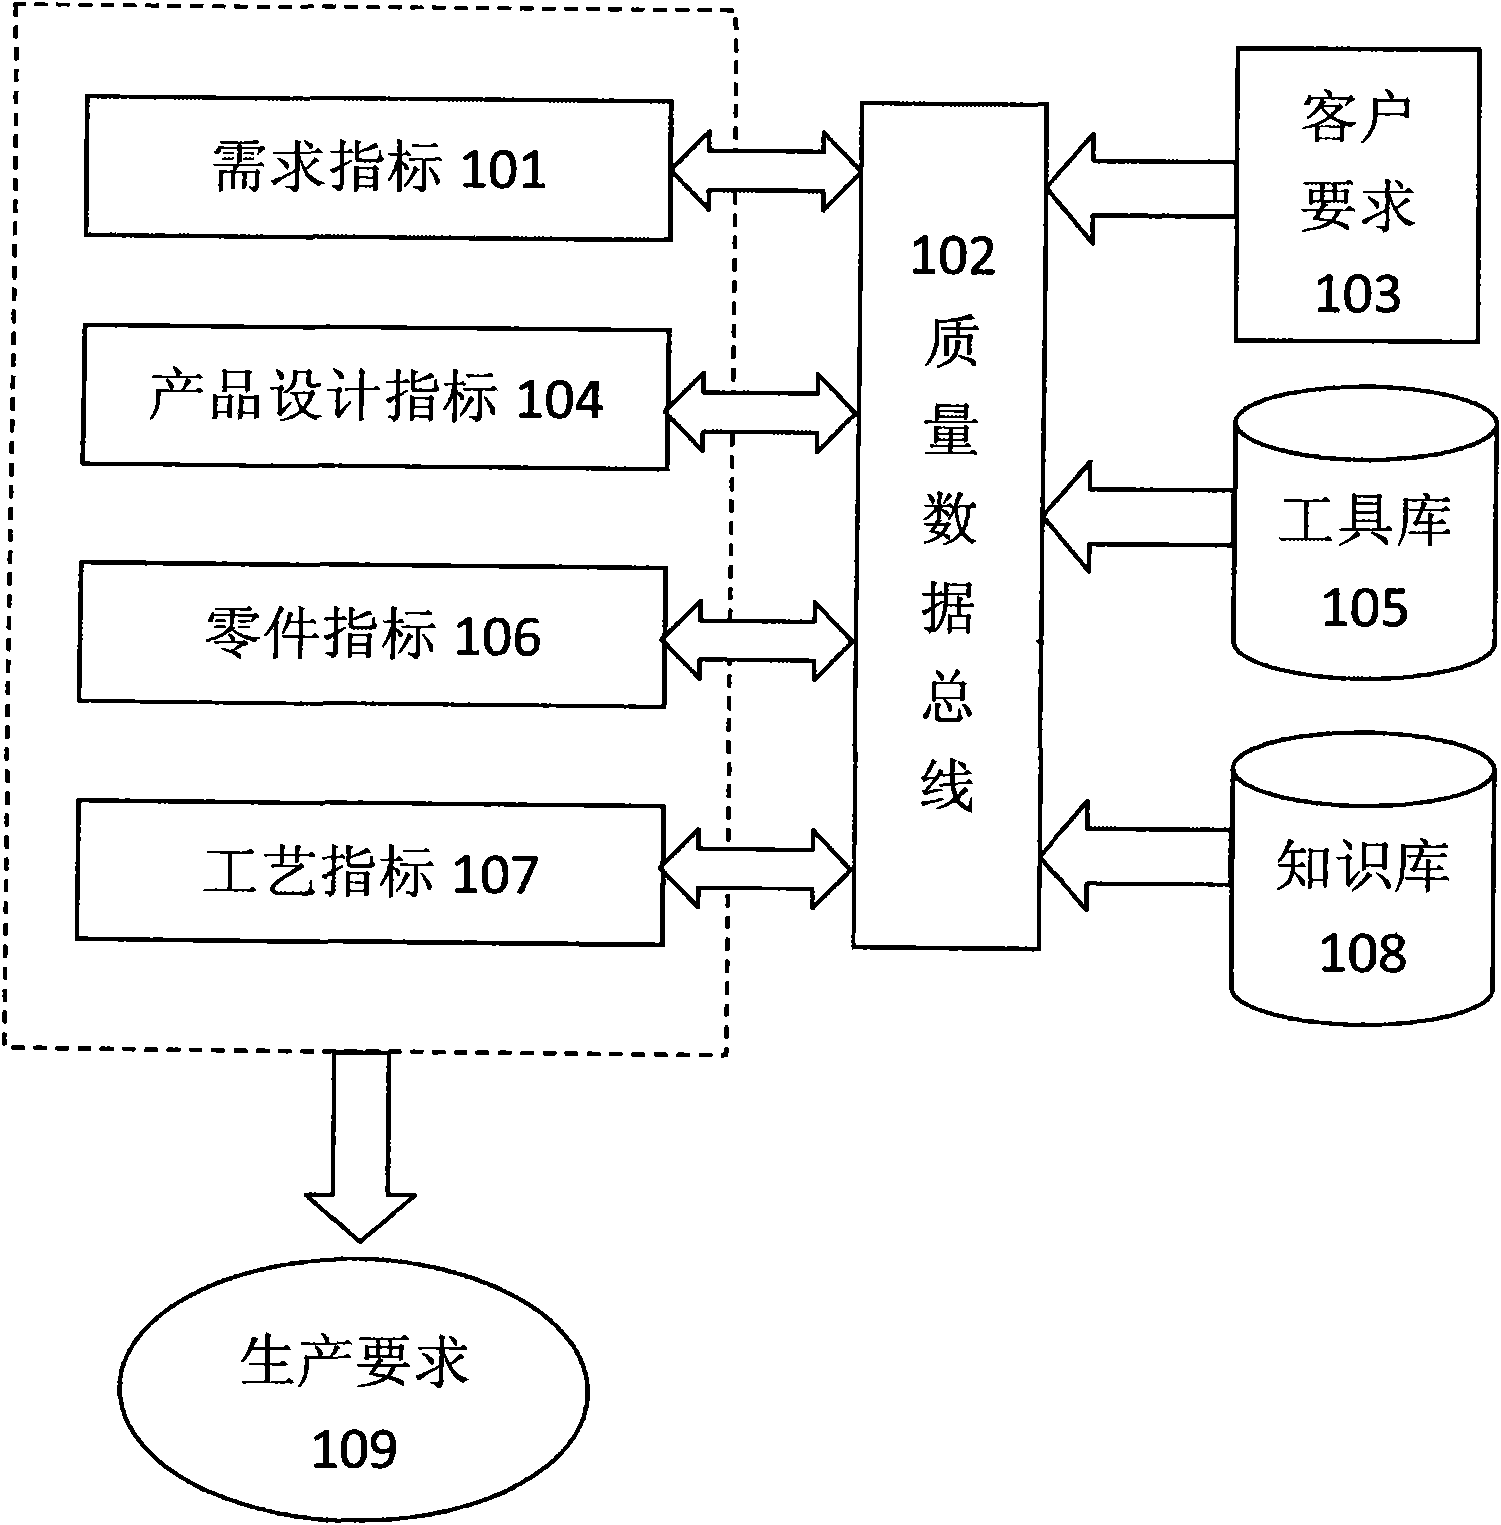 System and method for controlling researching and developing quality of product